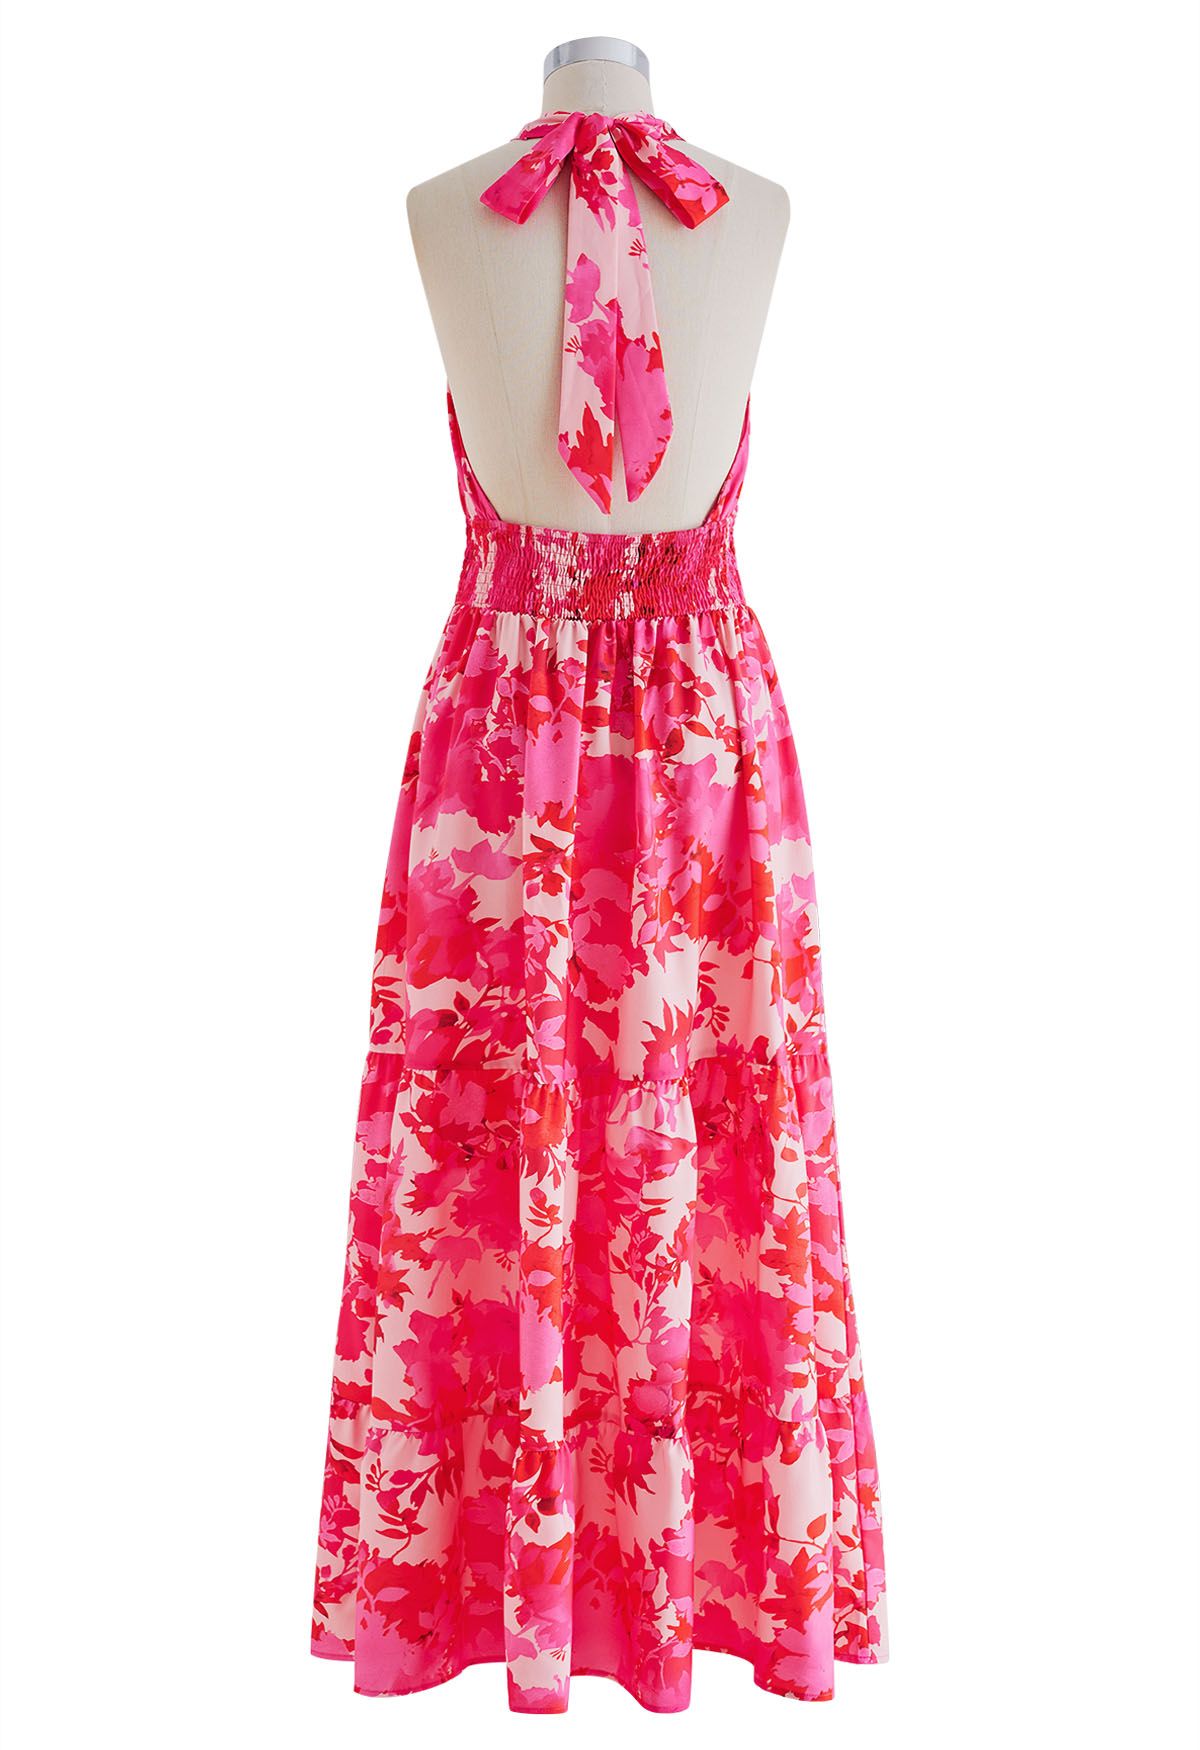 Hot Pink Floral Halter Maxi Dress - Retro, Indie and Unique Fashion